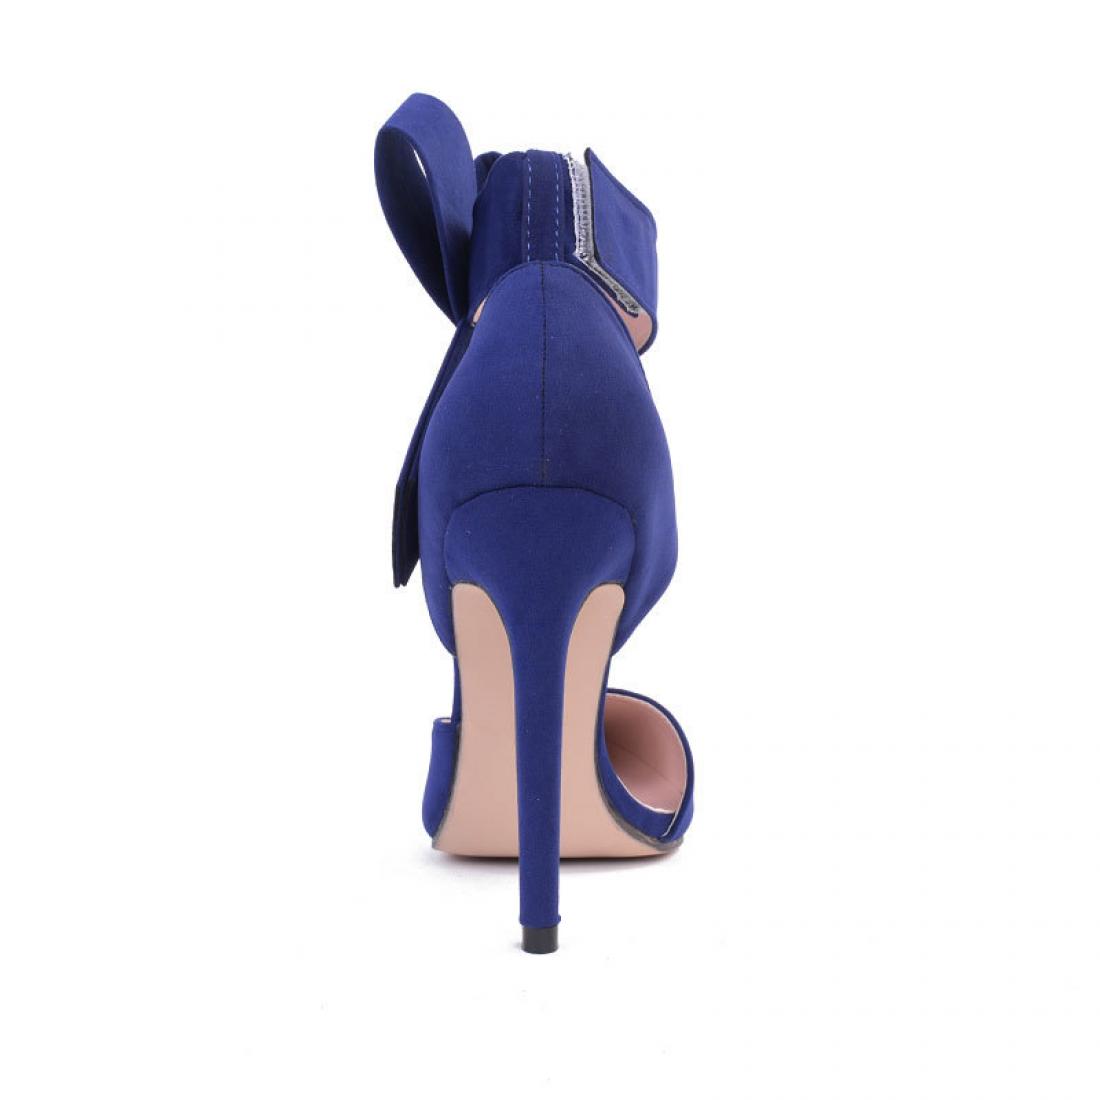 Blue Suede Ankle Giant Bow Stiletto High Heels Sandals Shoes ...